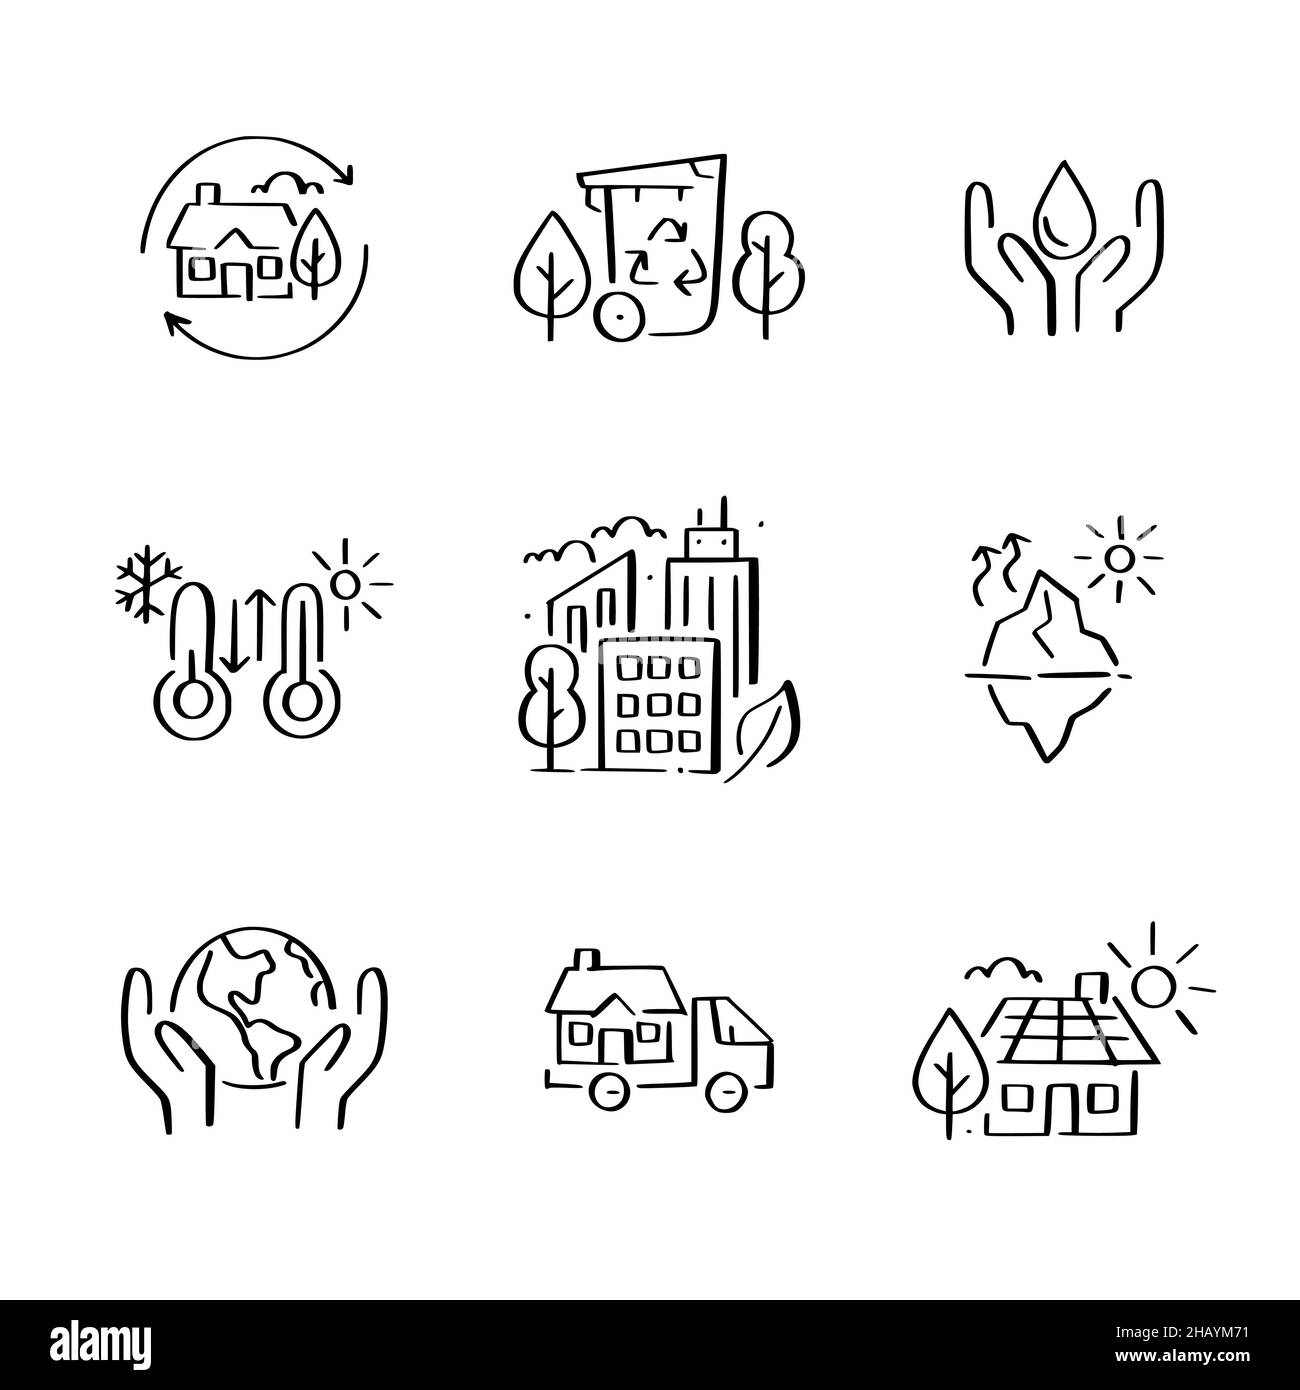 Global warming effects and prevention. Water conservation, clean energy and recycling. Doodle style icons Stock Vector